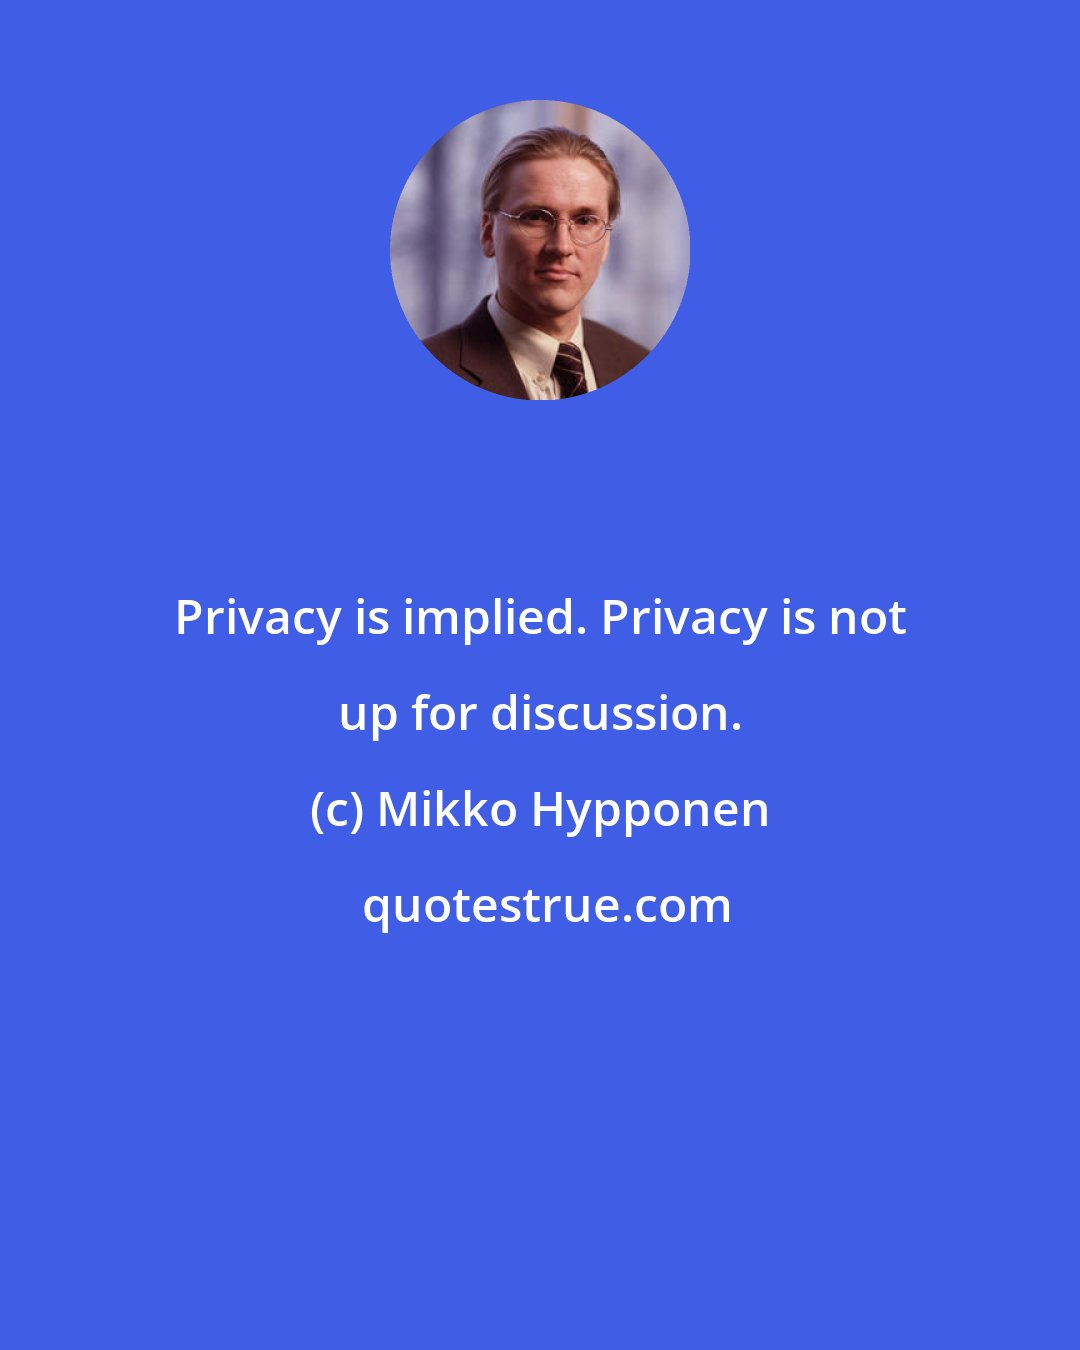 Mikko Hypponen: Privacy is implied. Privacy is not up for discussion.